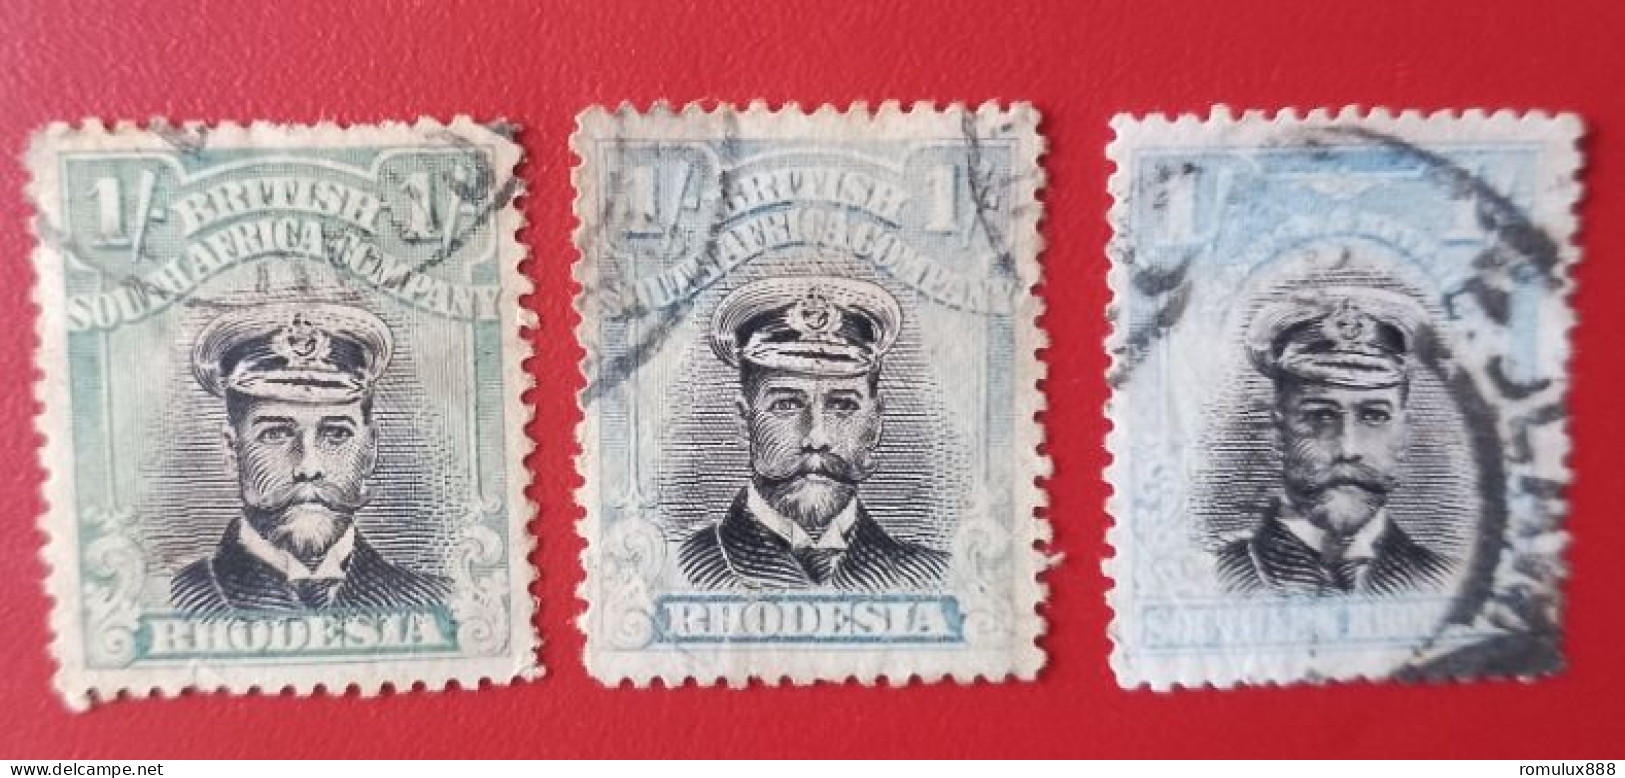 RHODESIA SACC 233 BRITISH SOUTH AFRICA X3 DIFFERENT COLOUR ONE ONE-1 SHILLING USED - Southern Rhodesia (...-1964)